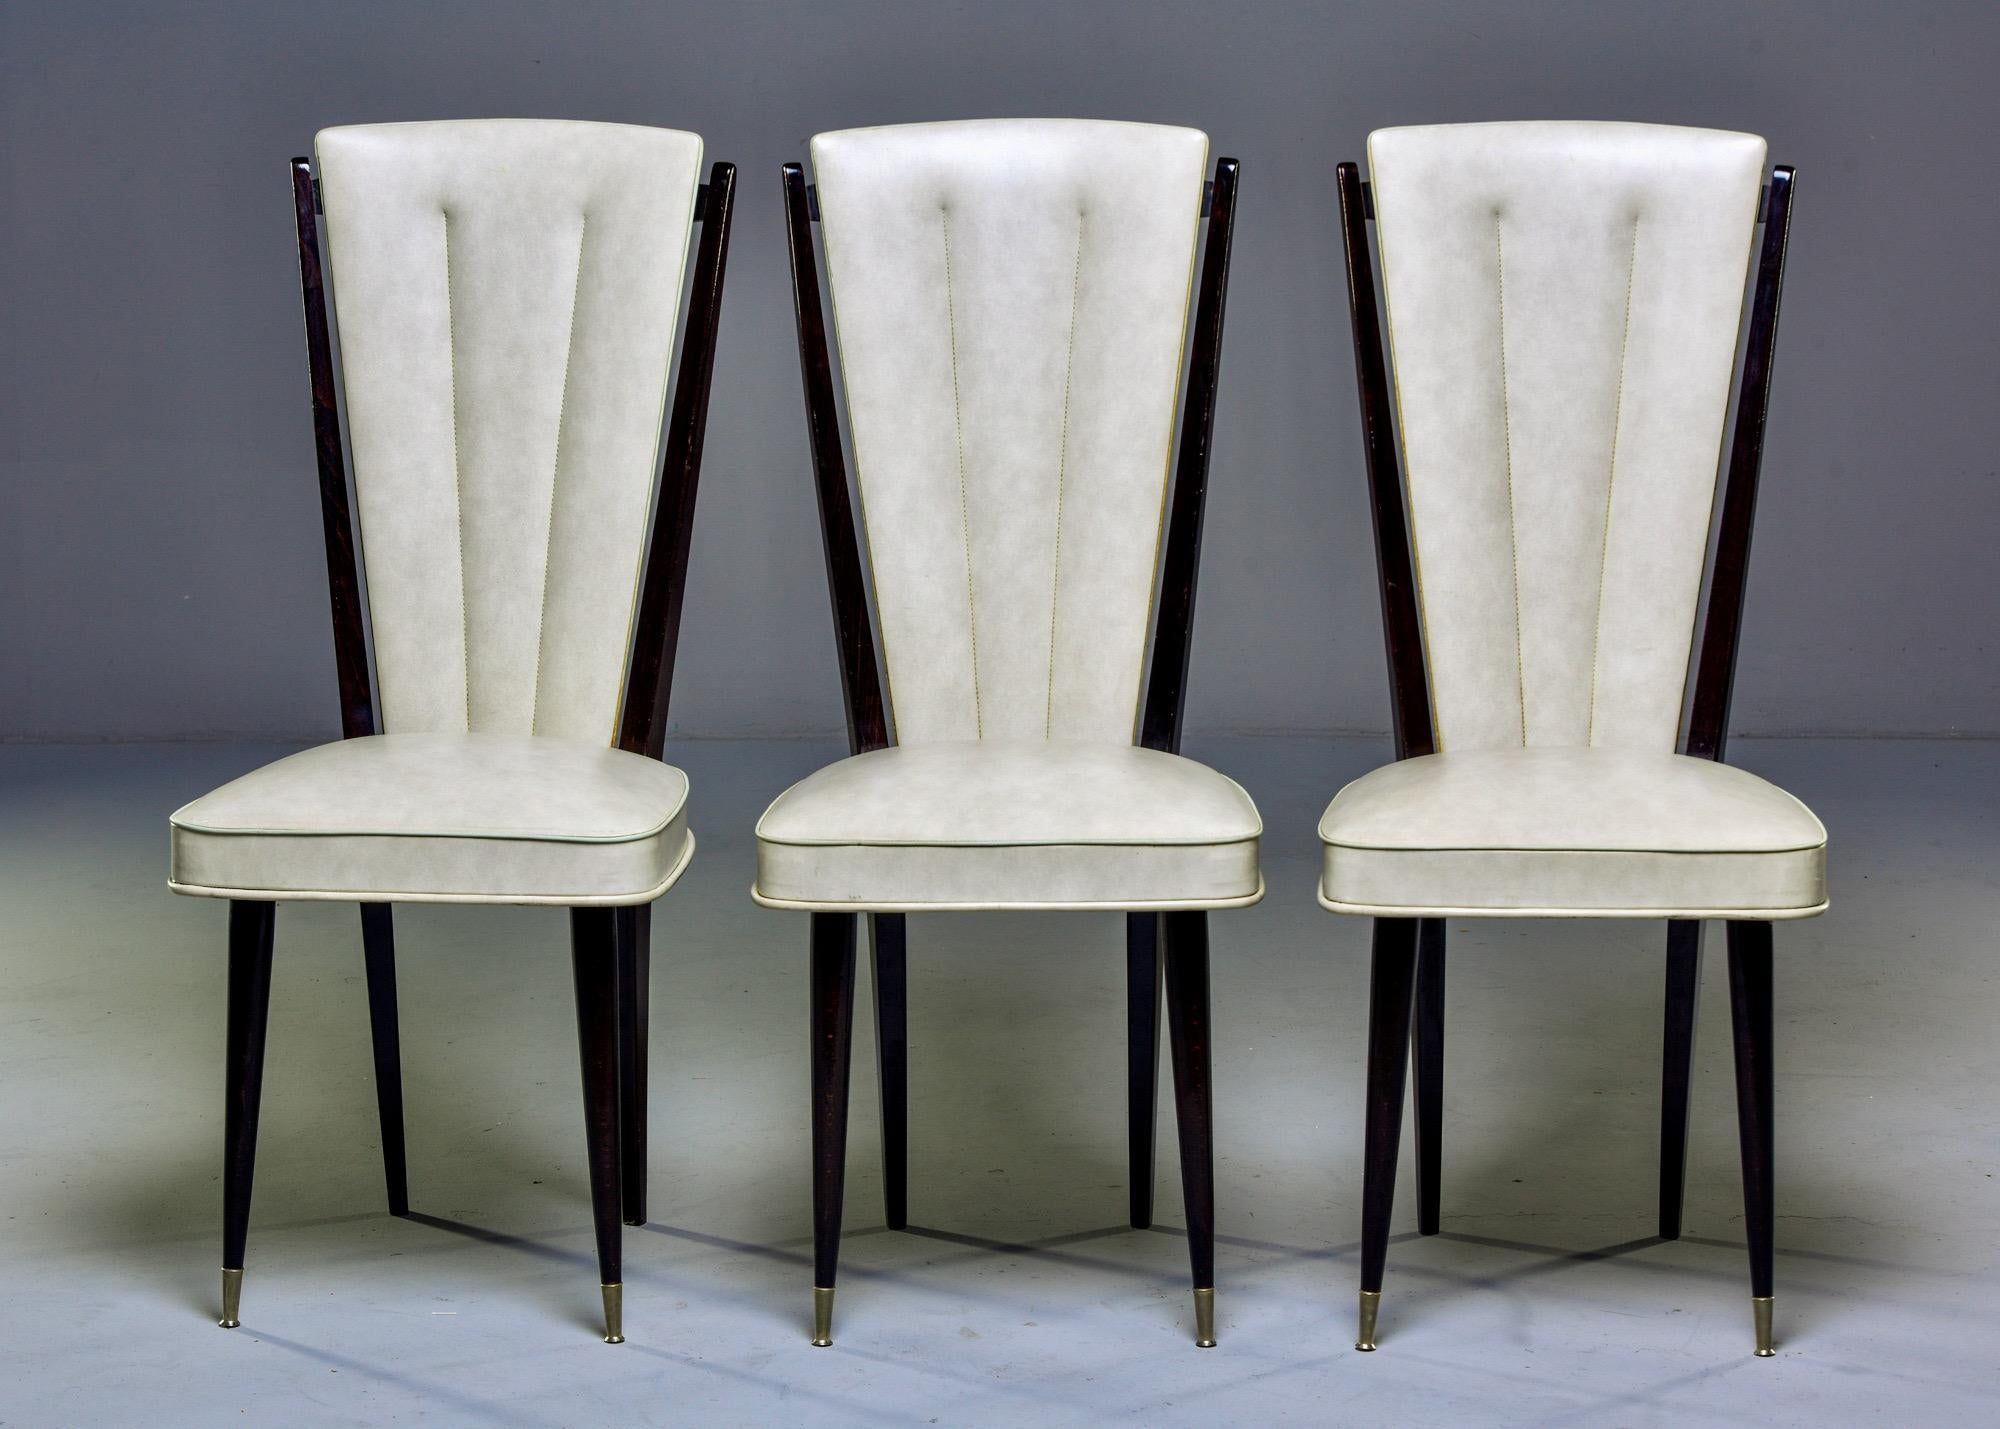 Set of French dining chairs with slender, dark-stained Macassar frames, circa 1950s. Tapered legs feature brass-capped front feet. Original white vinyl upholstery can be used as is, but these would be stunning in a new fabric of your choice. Unknown